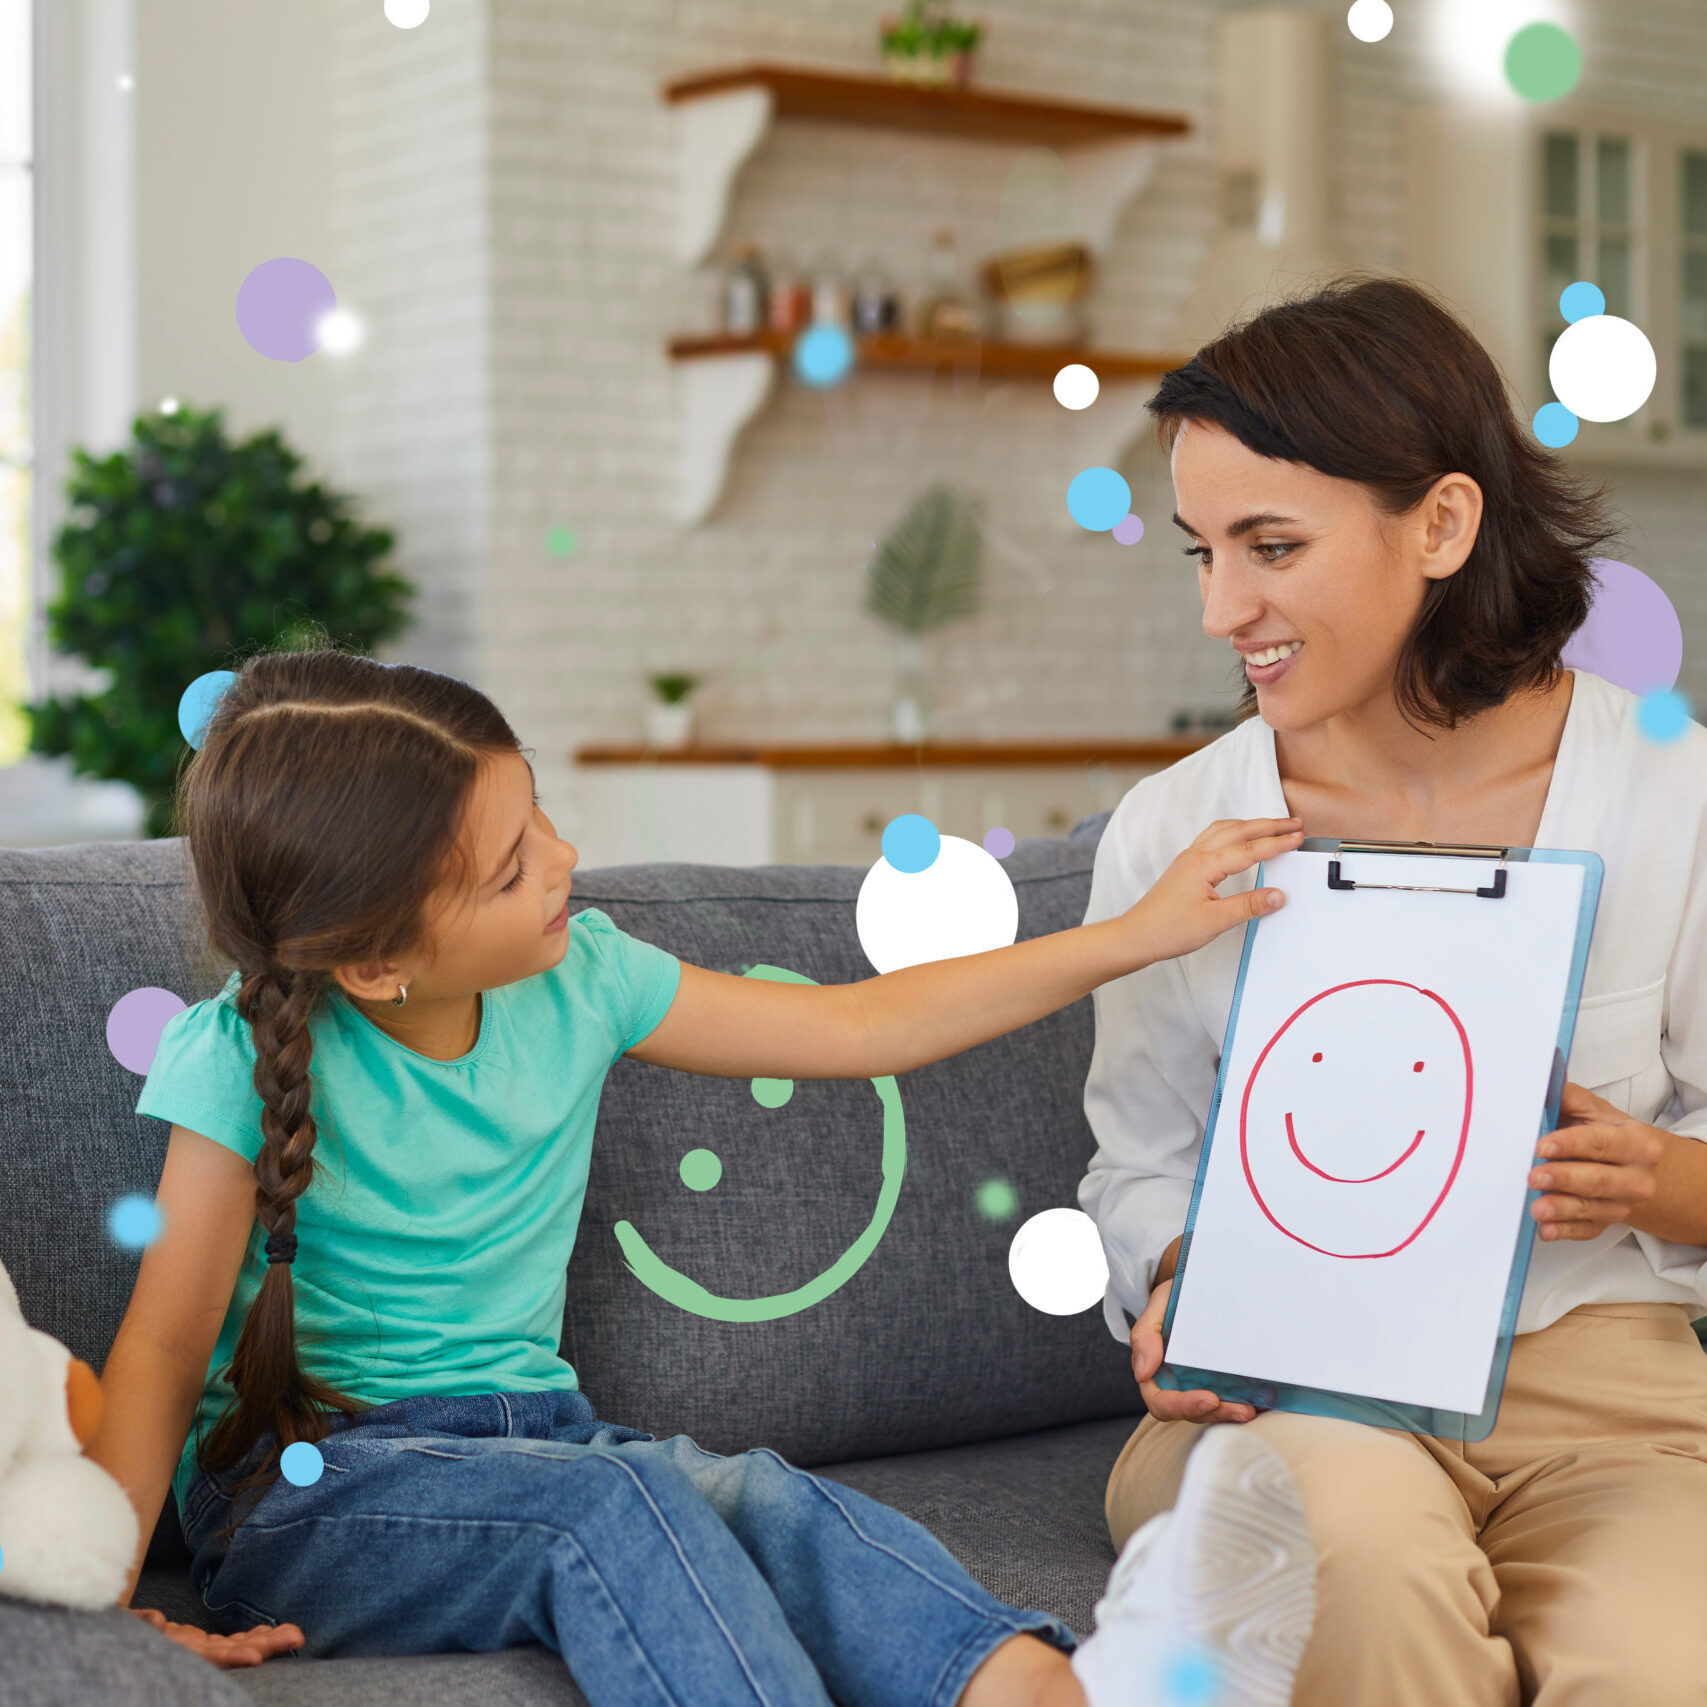 Smiling assertive psychologist with picture of happy emoji talking about emotions with 8 - 10 year old girl. Supportive private therapist and child communicating during therapy session at home